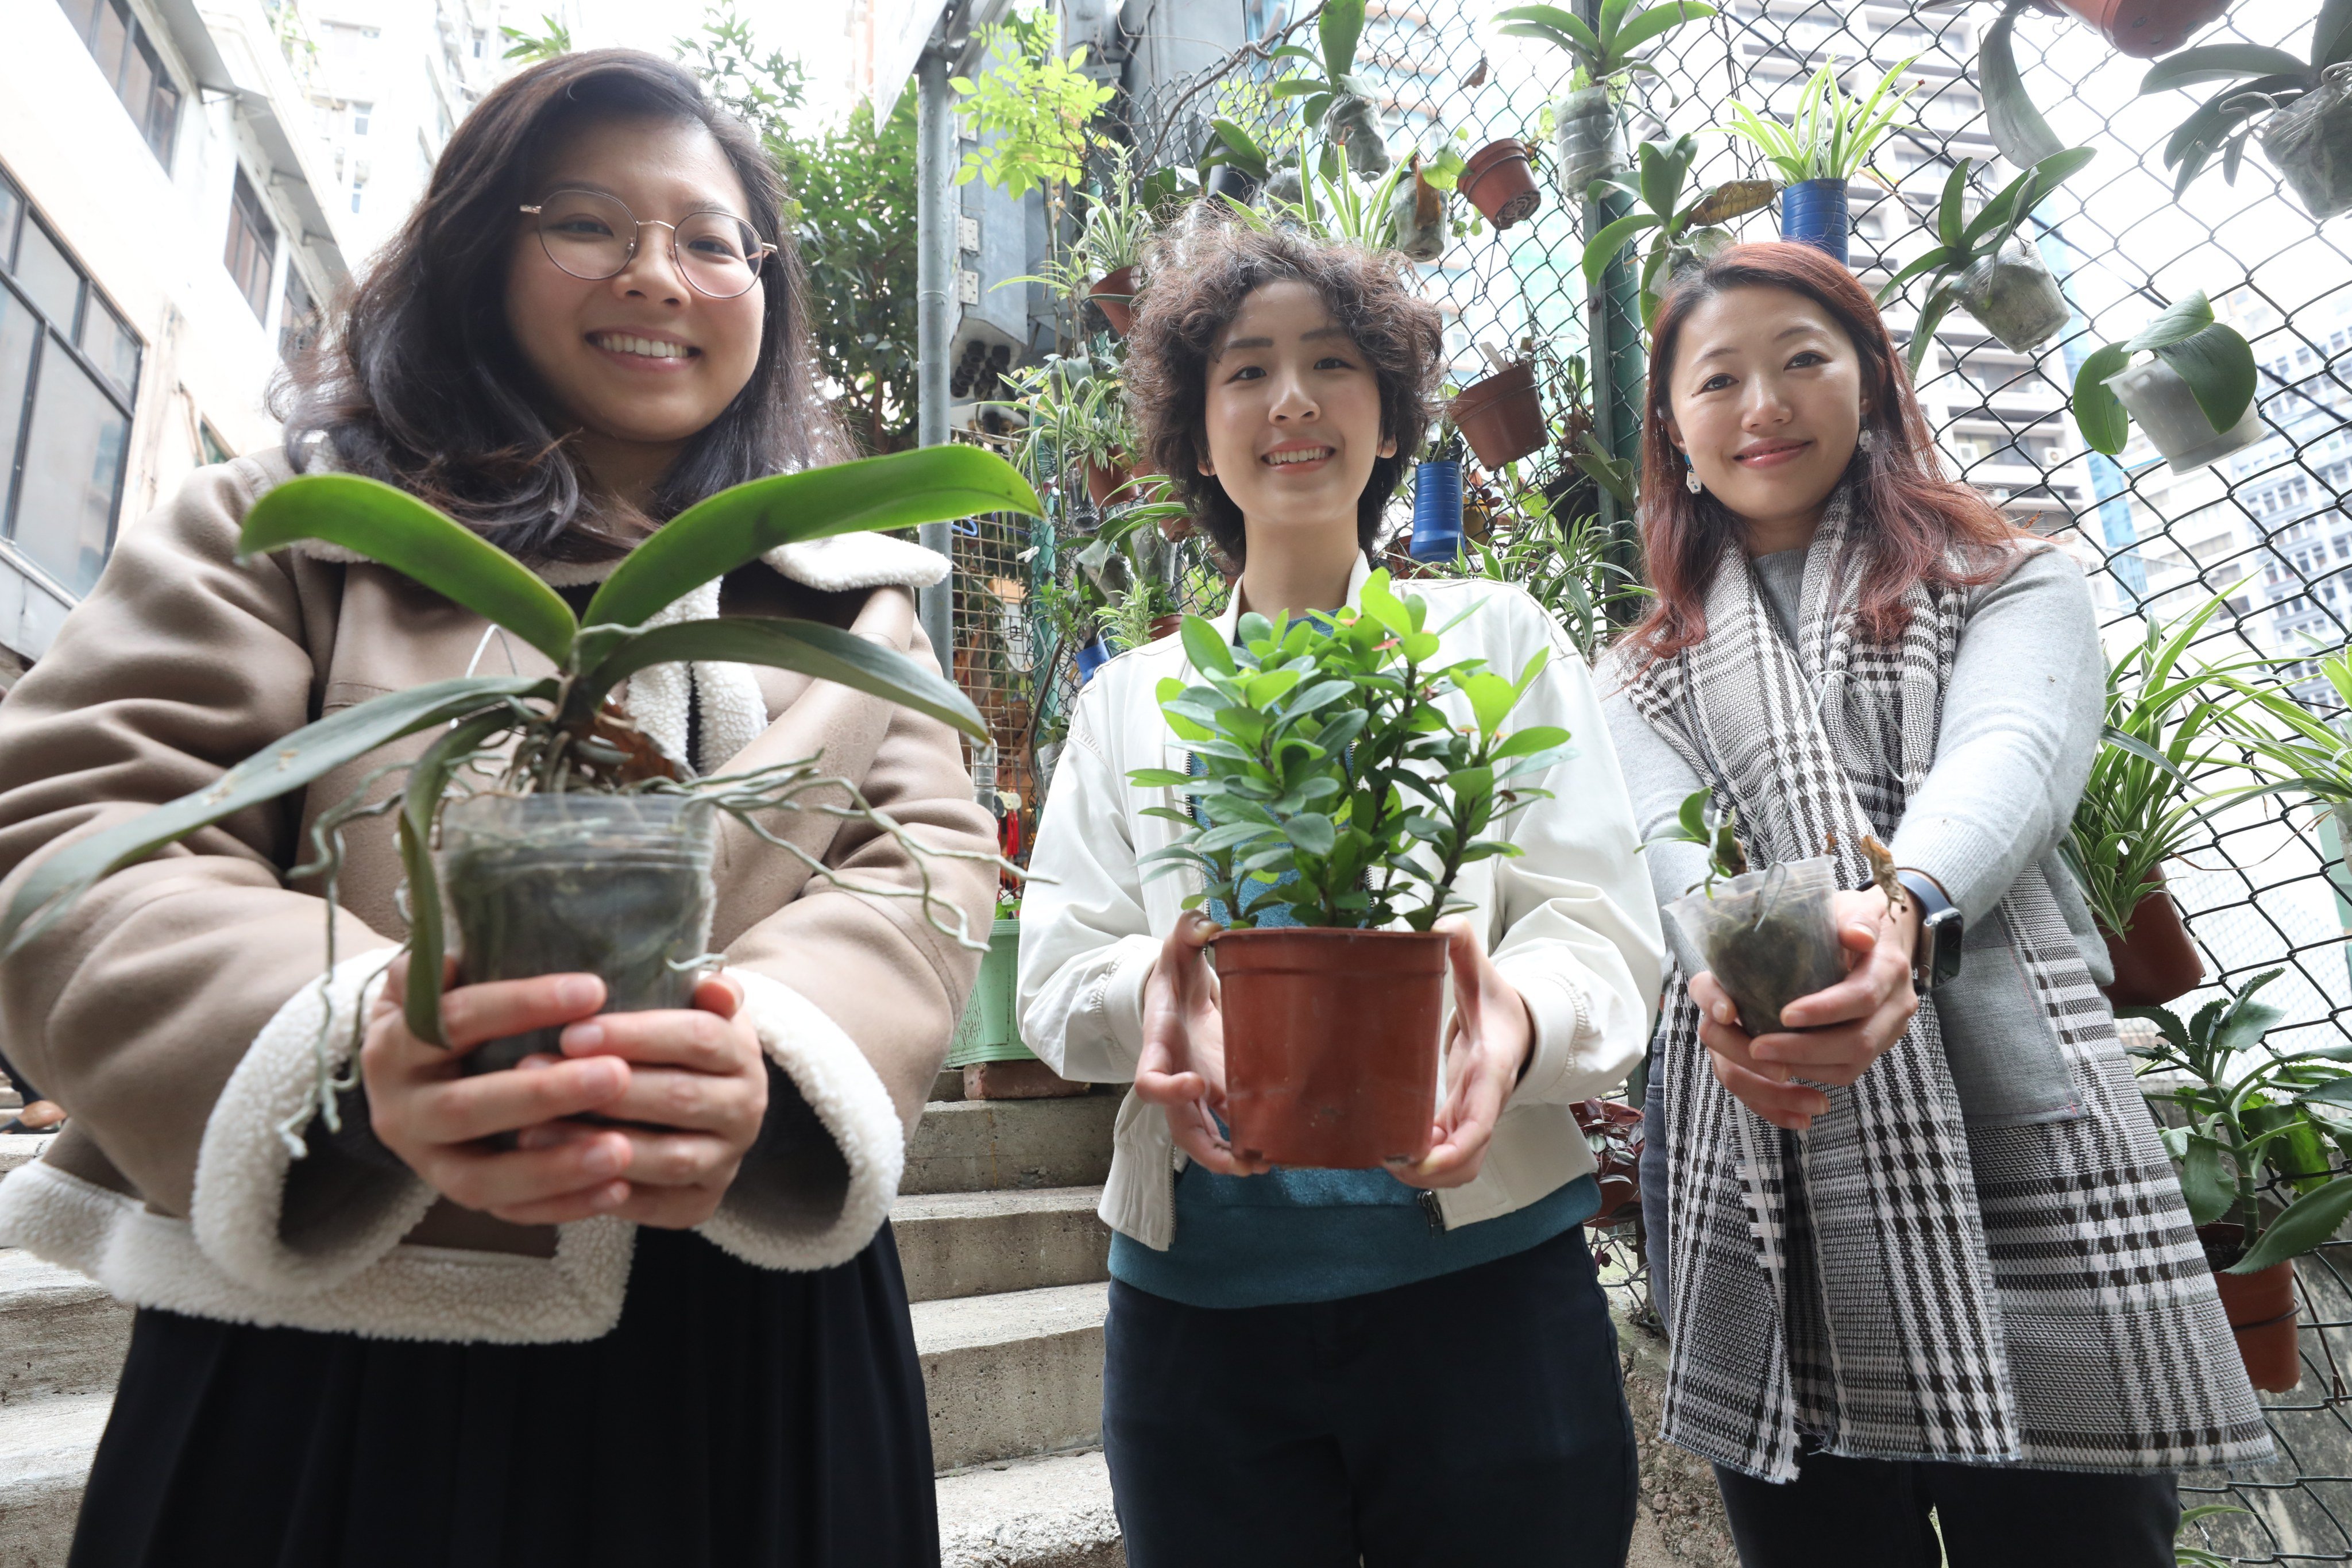 Catherine Chao (from left), Chloe Ting and Sarah Mui are urban designers who worked on the Community Plant Library by One Bite Social. Photo: Sun Yeung